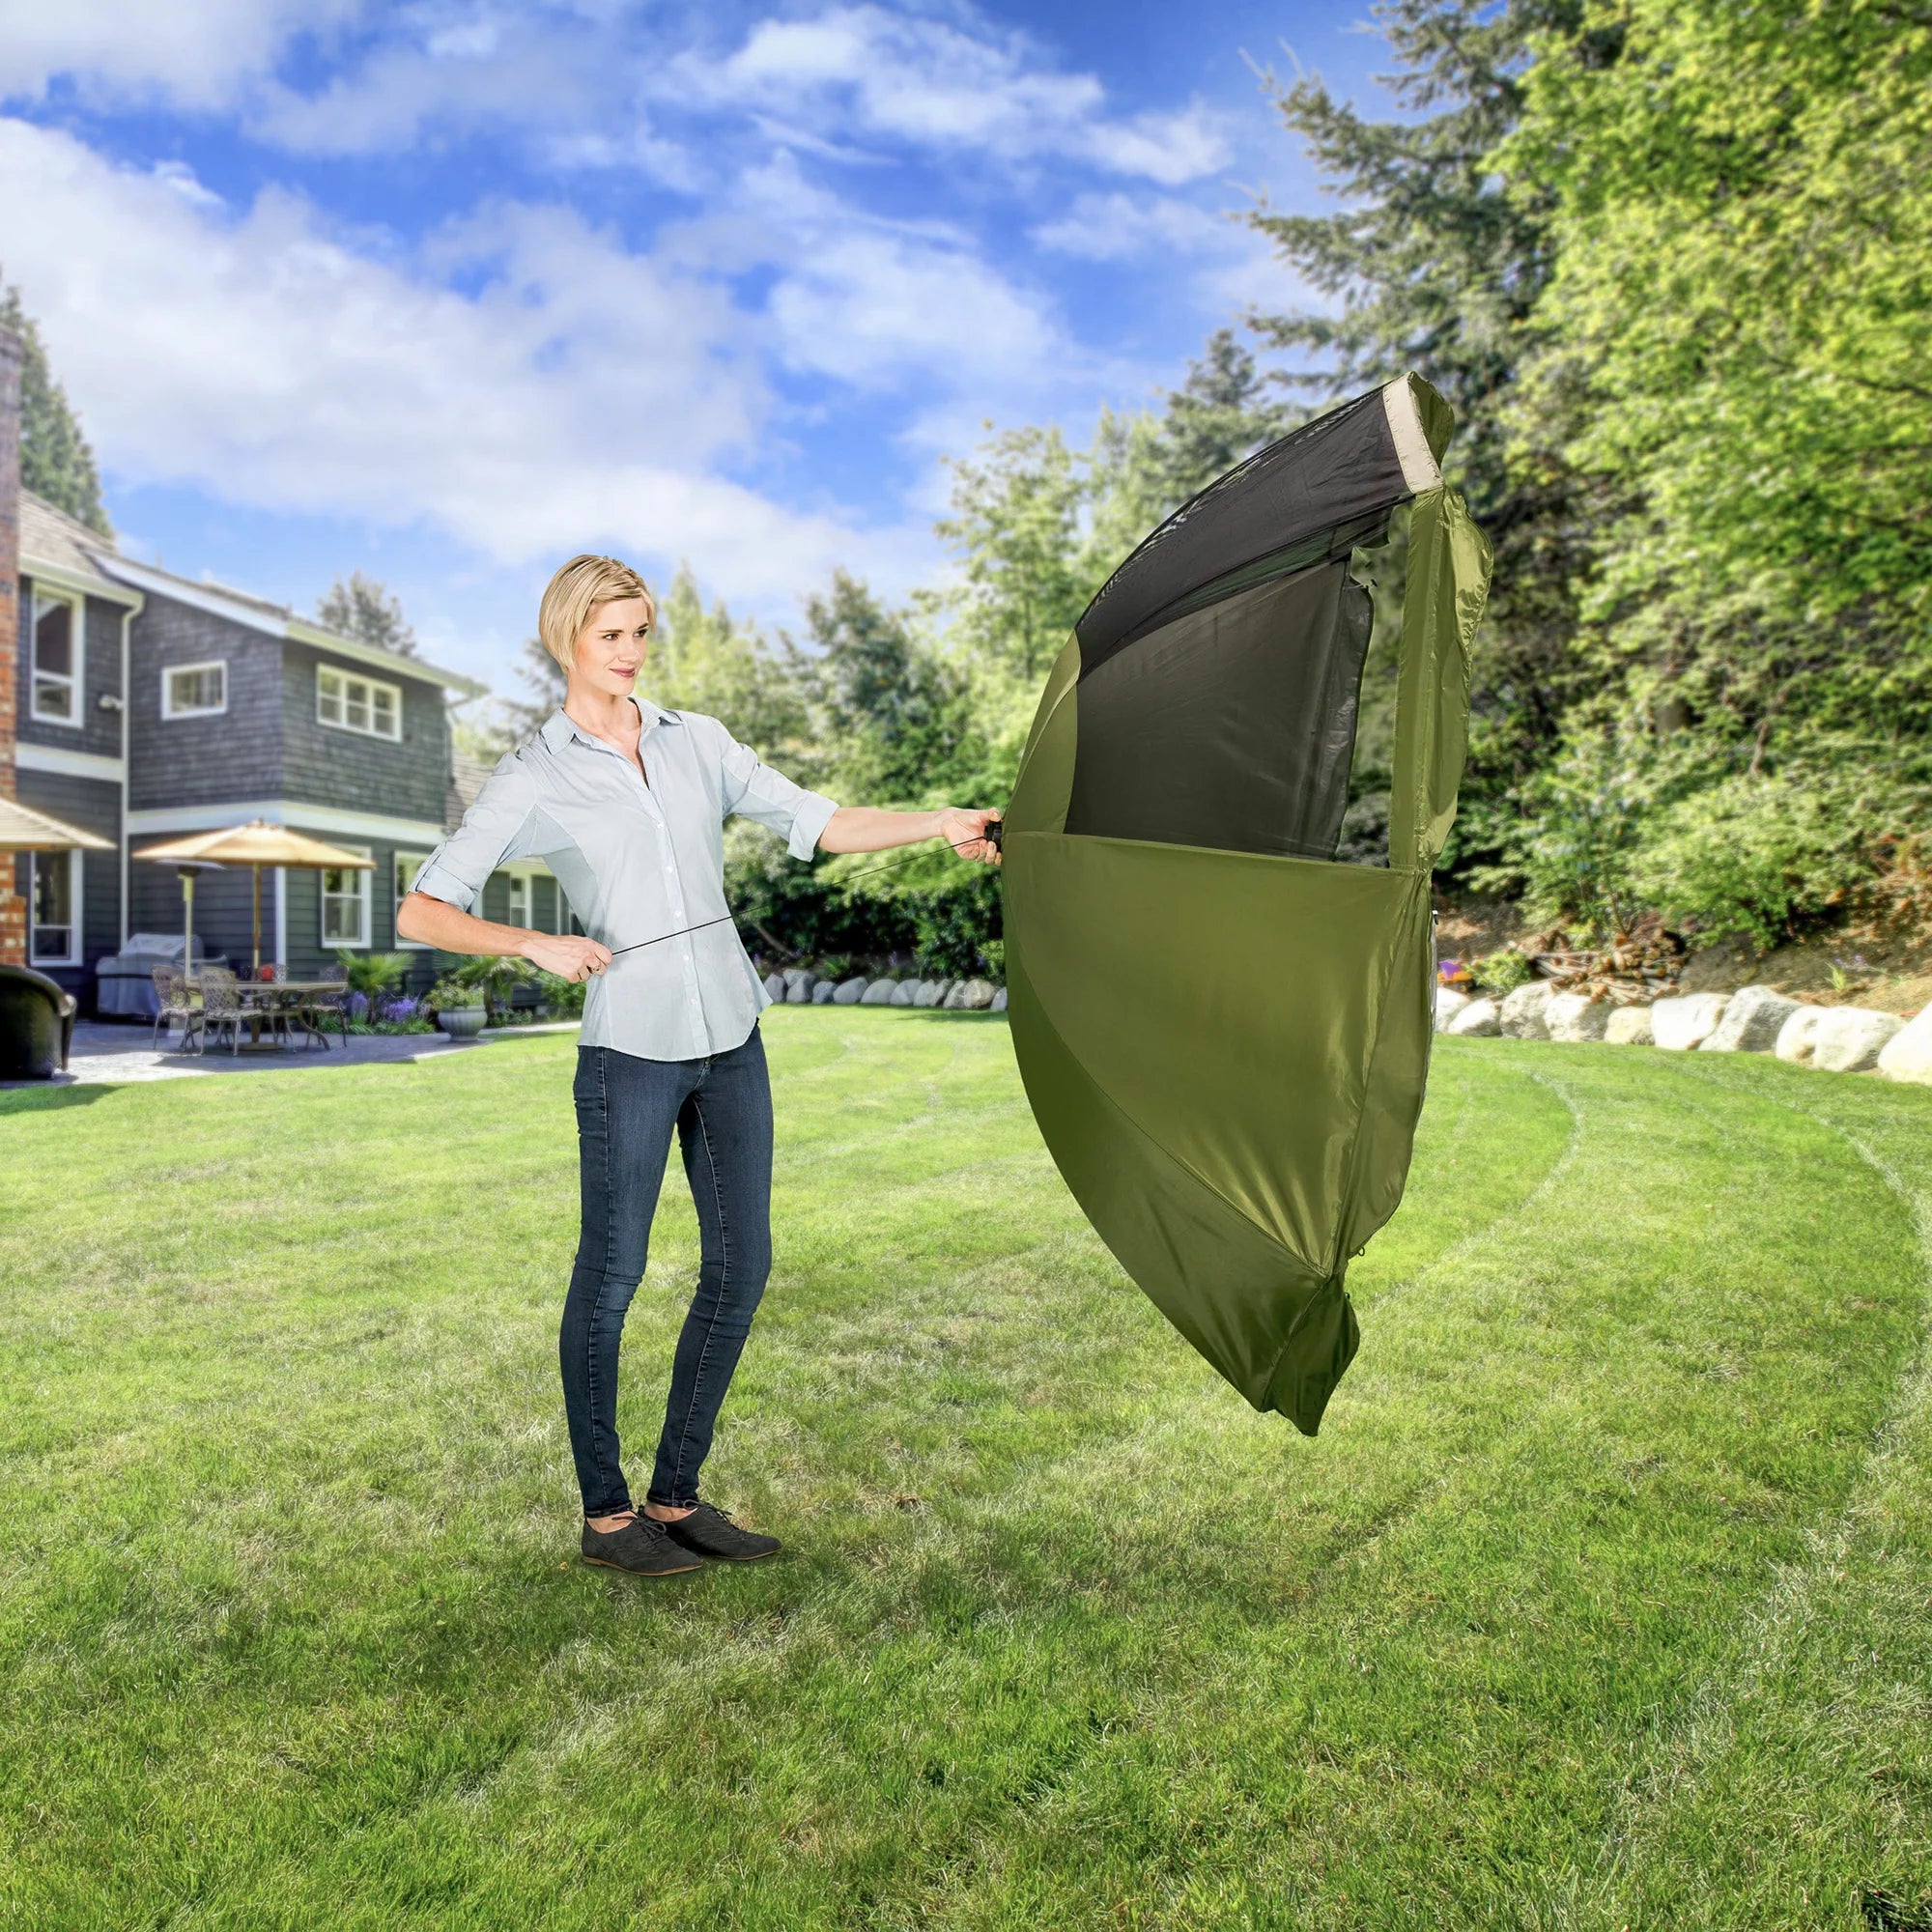 A woman opening the Canopy of the Portable Pet Pen on a green space in a backyard.